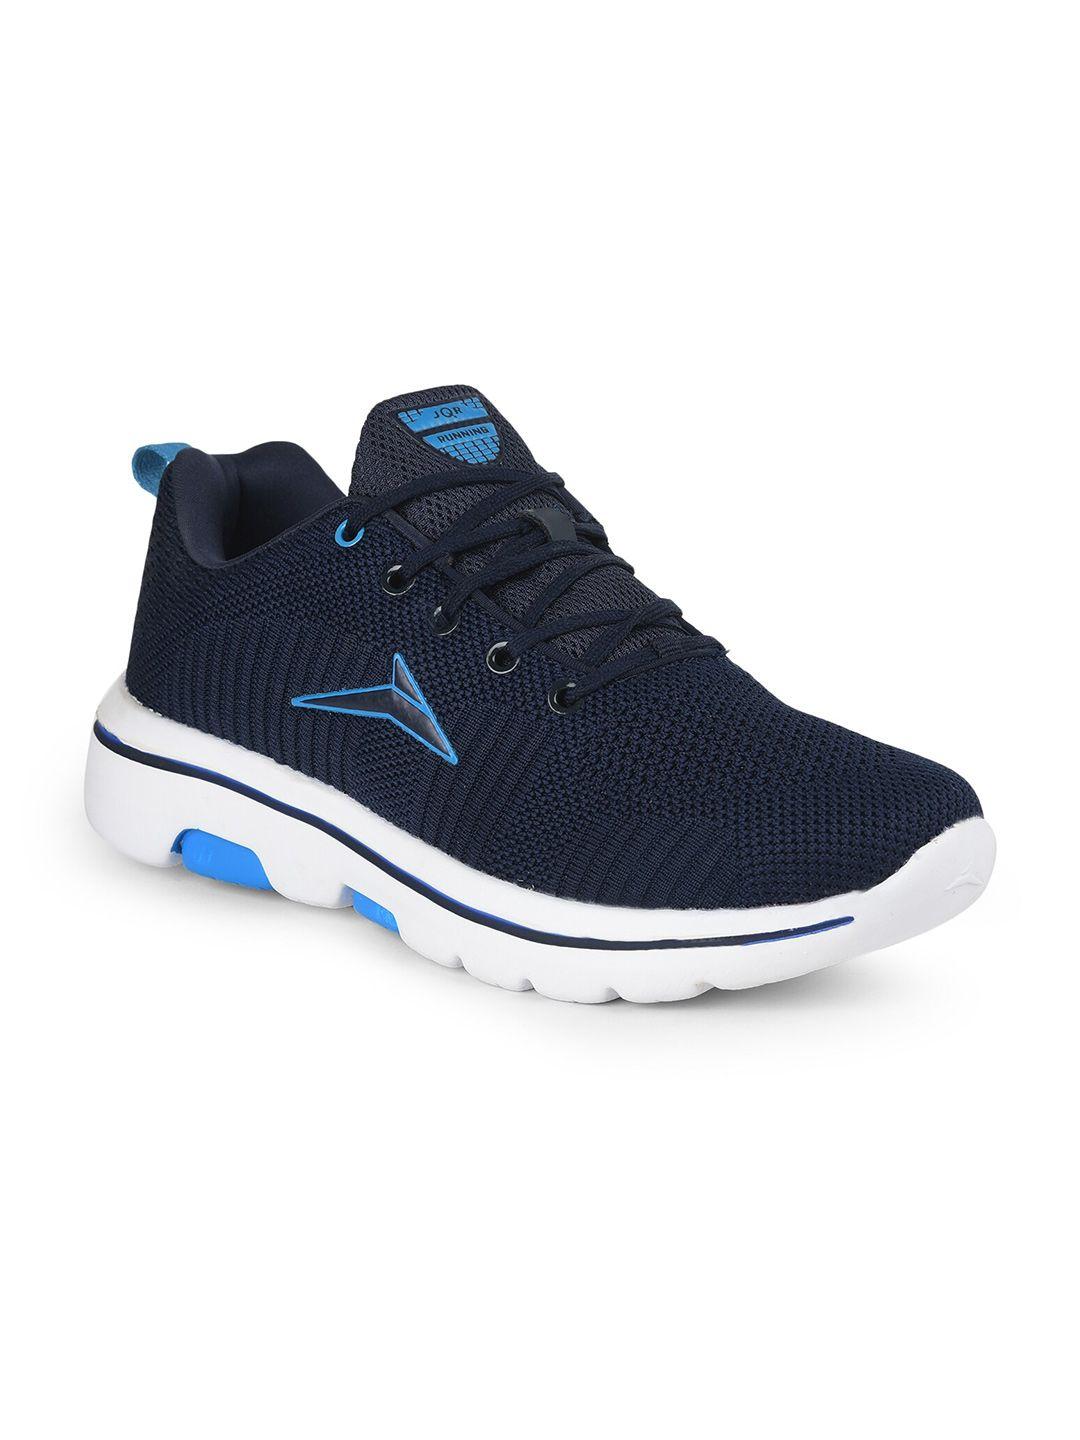 jqr men navy blue lace up mid-top mesh running sports shoes